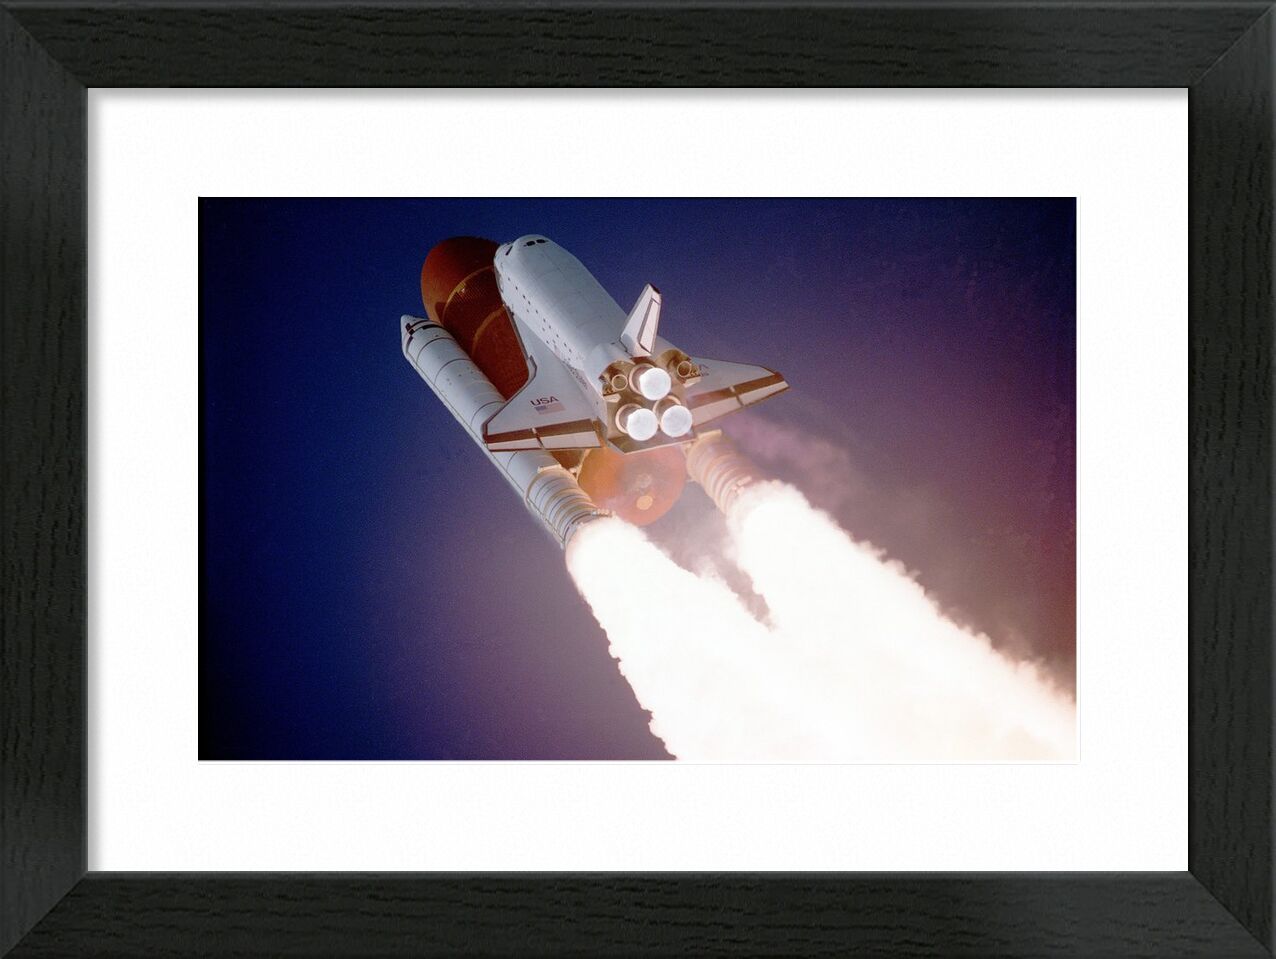 Rocket launch from Pierre Gaultier, Prodi Art, space shuttle, lift-off, liftoff, nasa, aerospace, outer space, gravity force, science, start, rocket, fire, repulsion